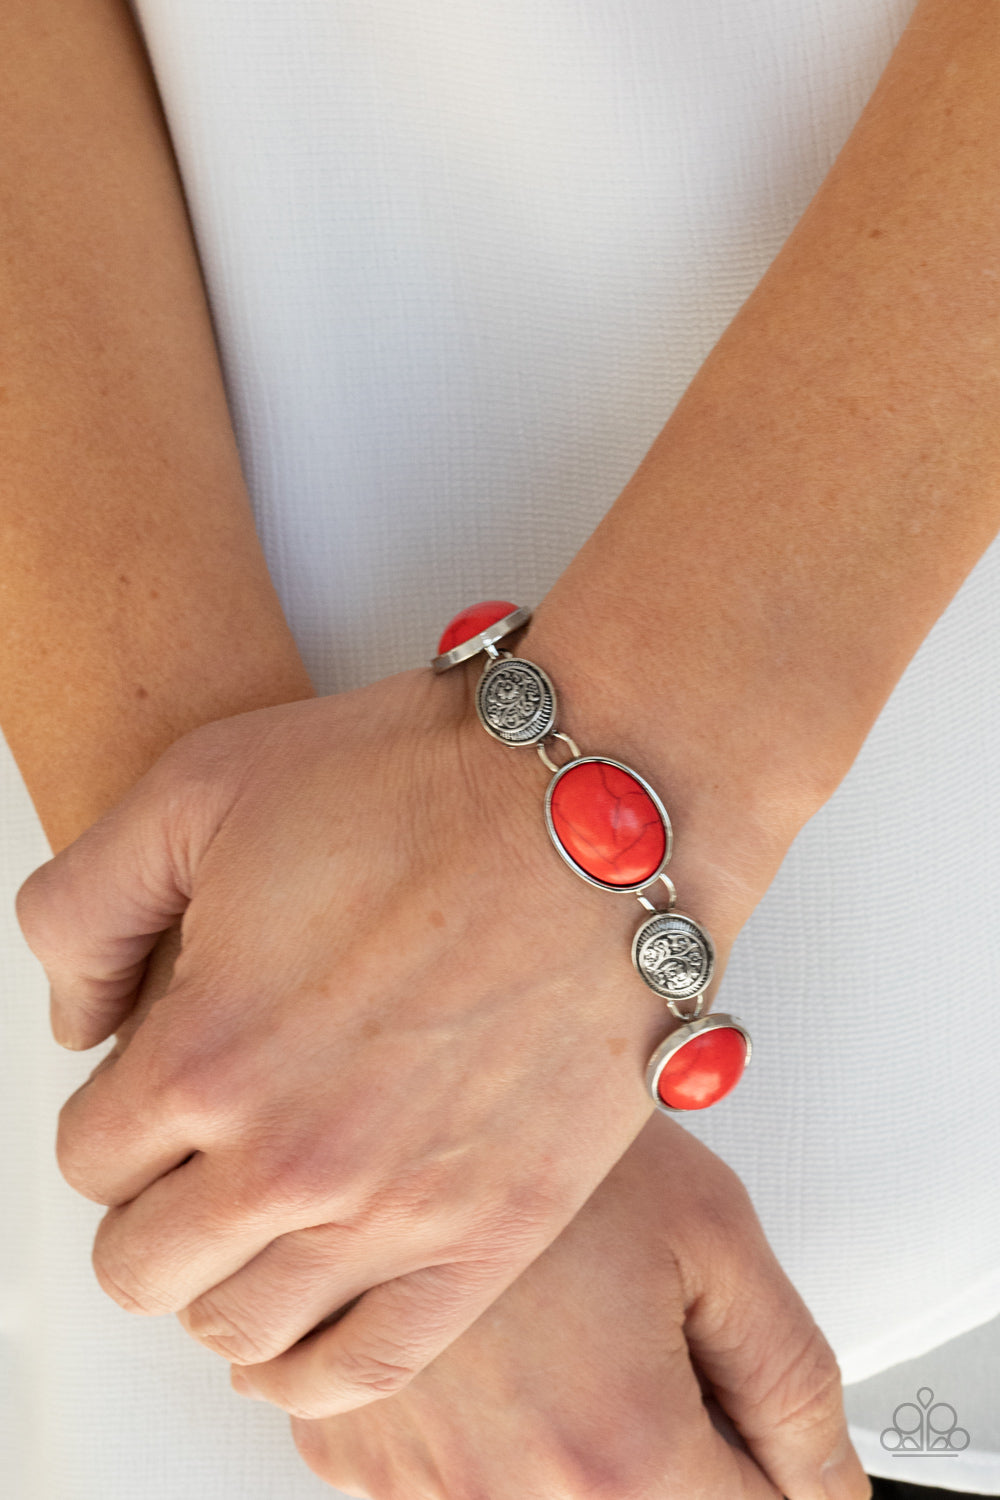 PRE-ORDER - Paparazzi Cactus Country - Red Stone - Bracelet - $5 Jewelry with Ashley Swint